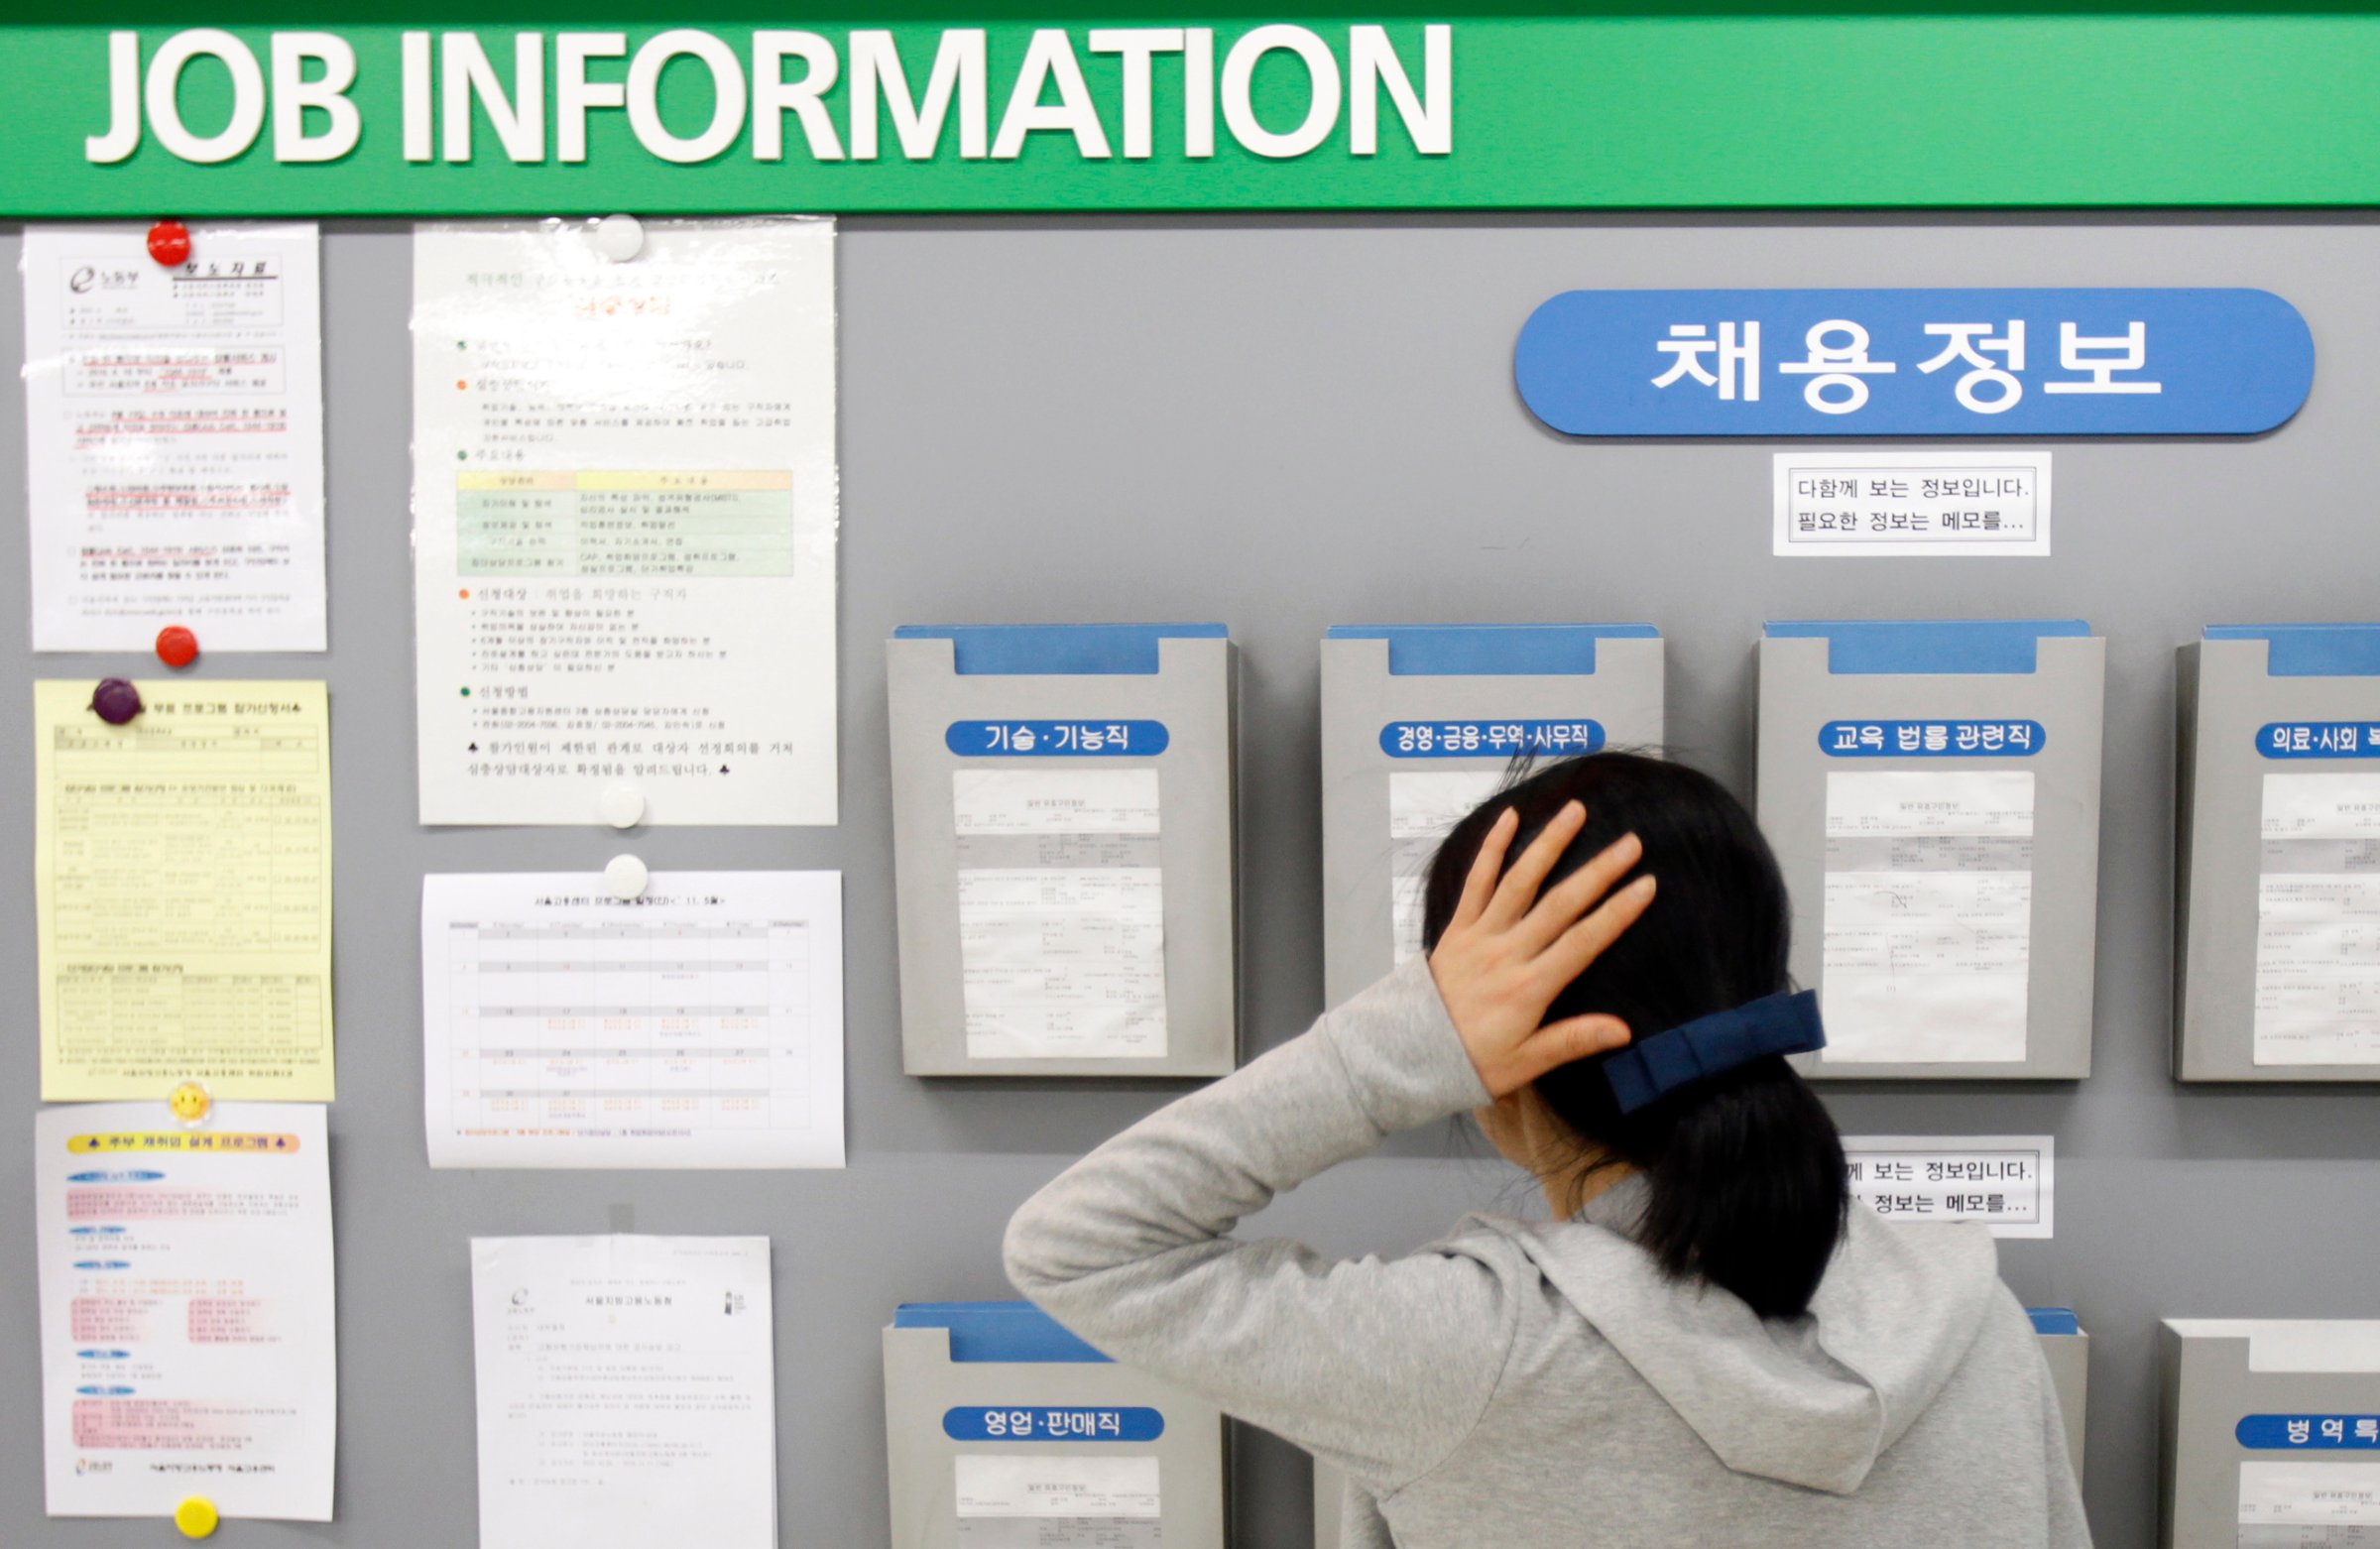 A jobseeker looks at a board showing job information at an office of the Employment Information Service in Seoul